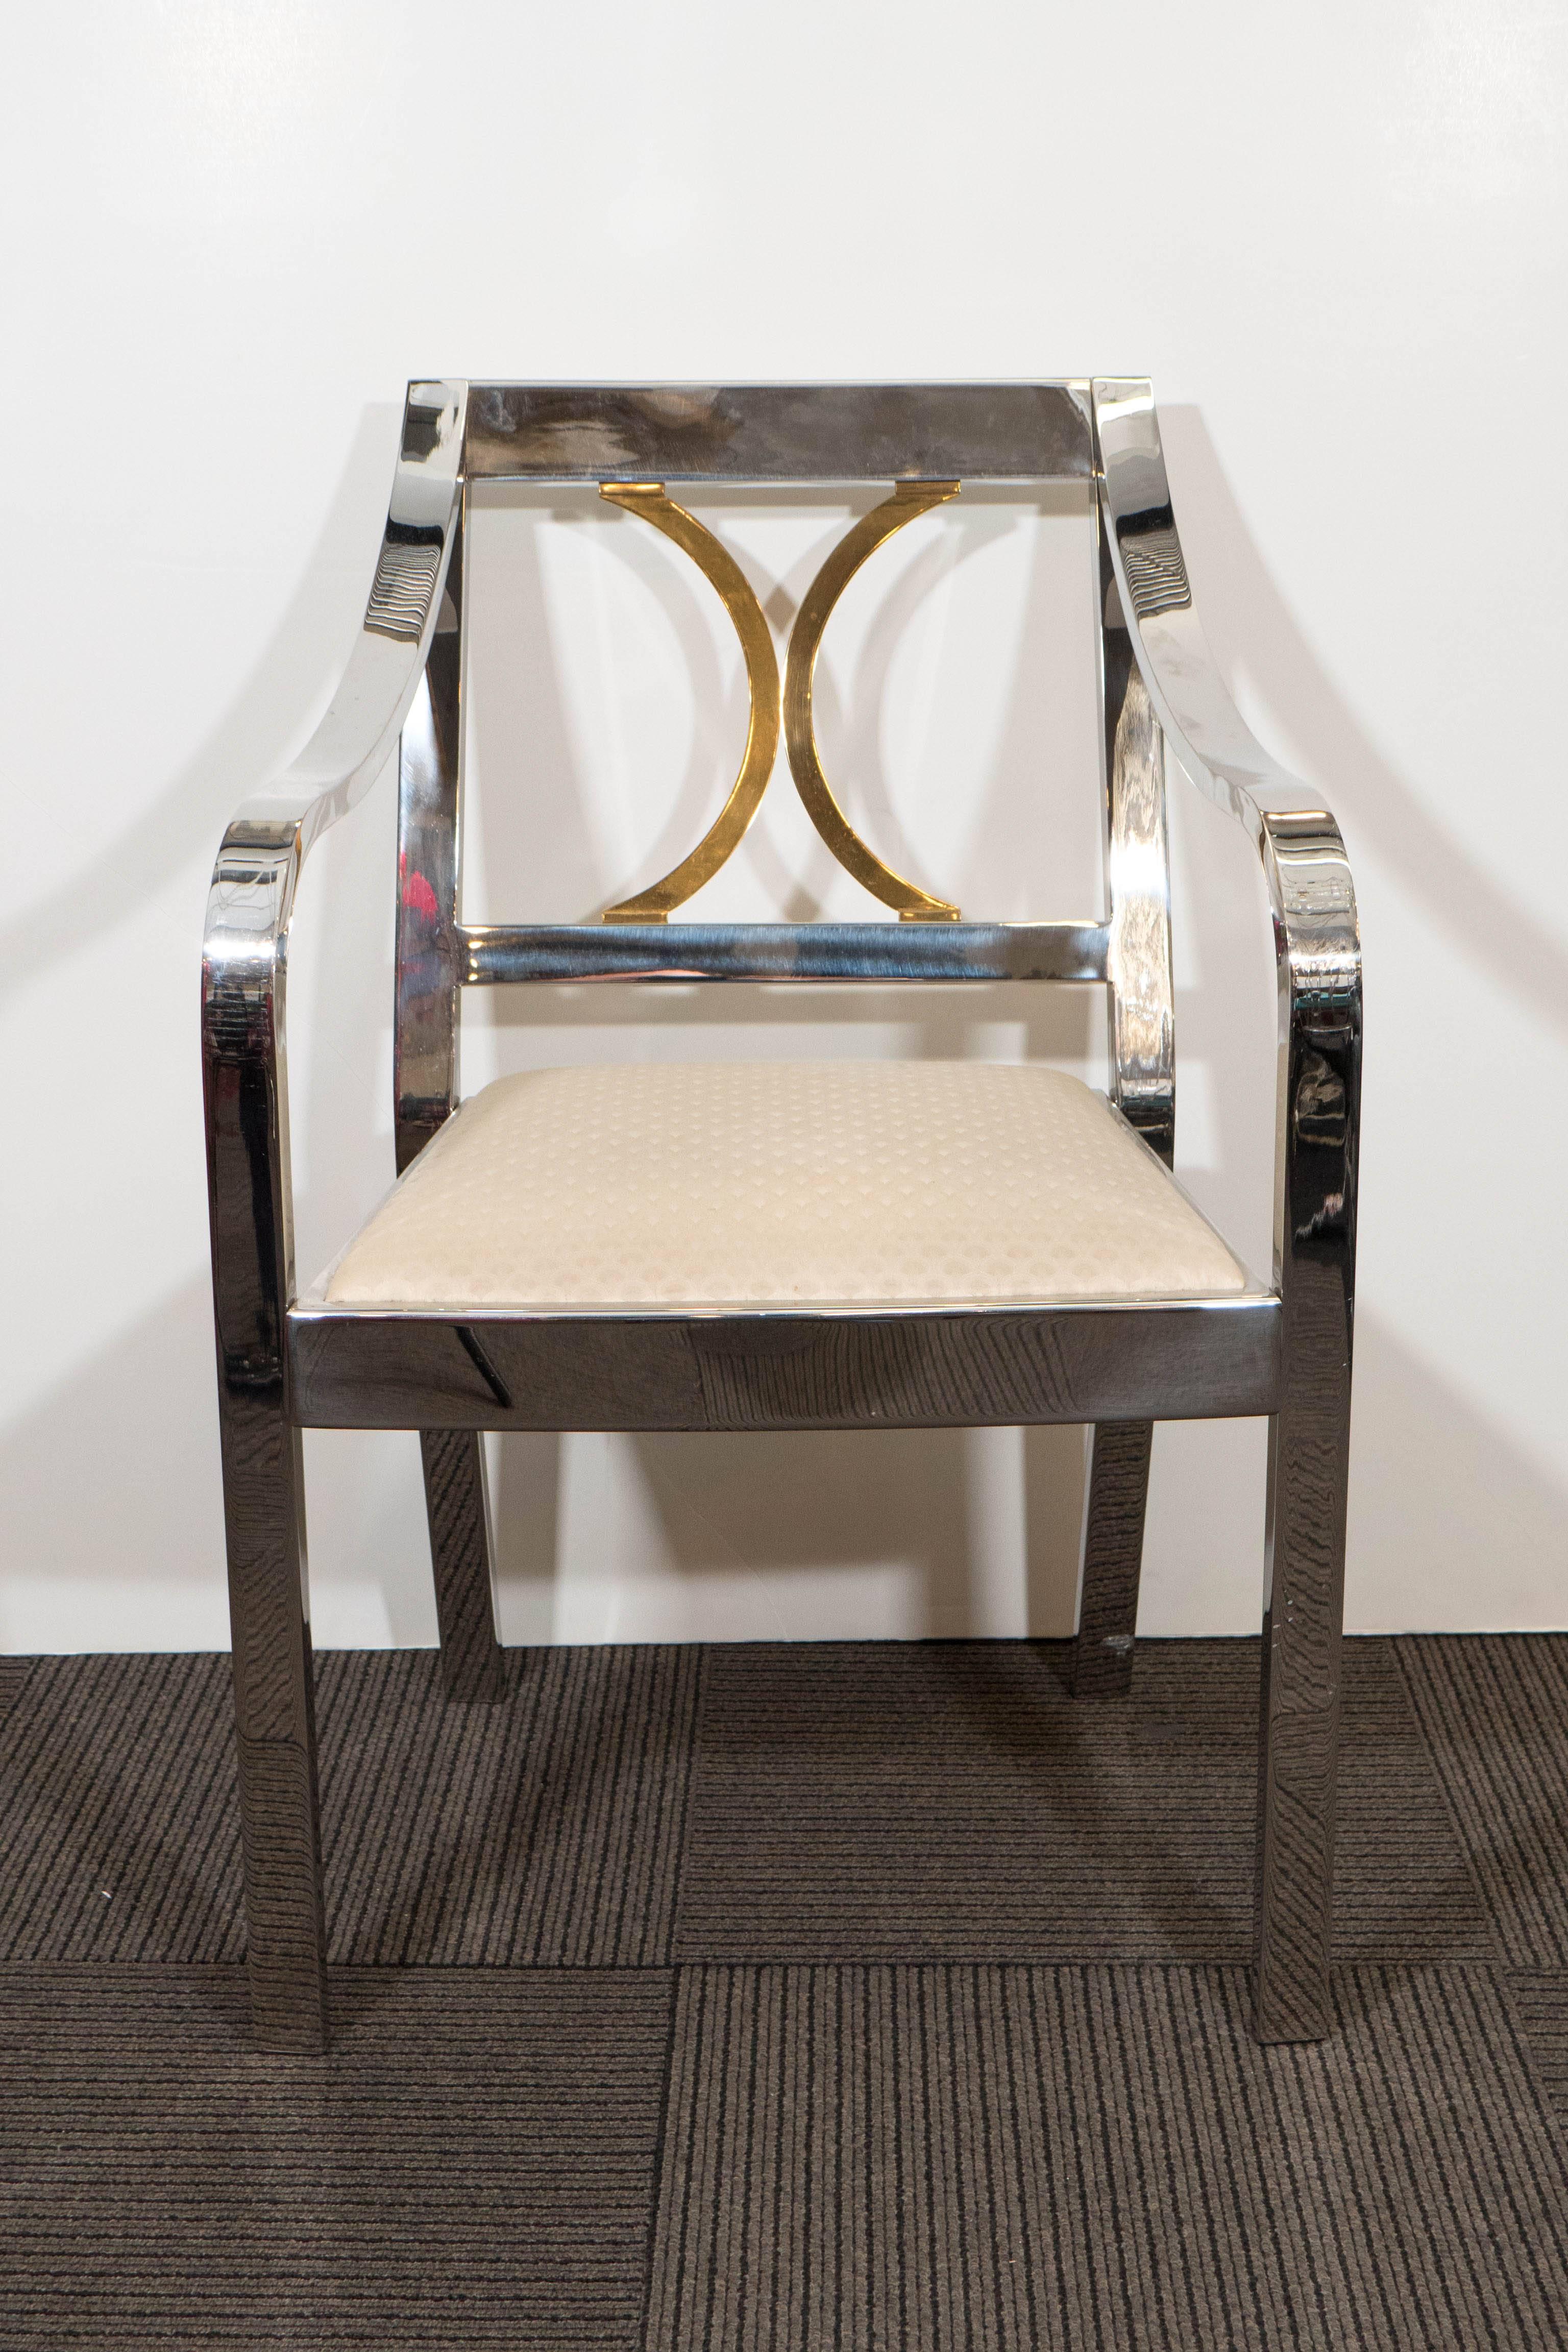 Plated Karl Springer Armchair in Polished Steel with Brass Detail